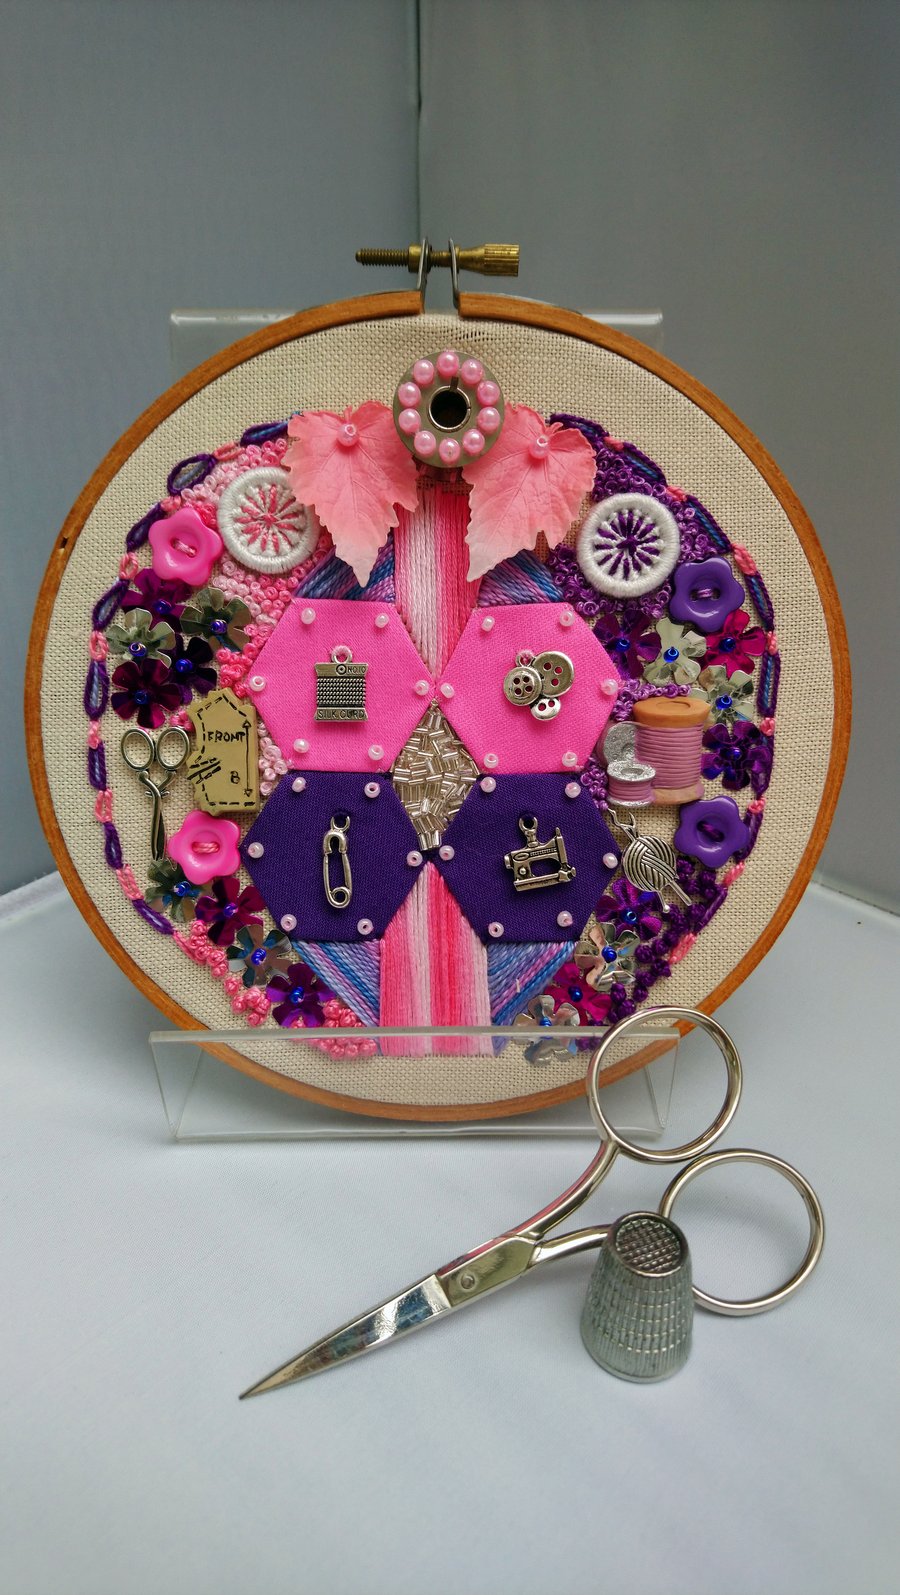 Collage Sewing Room Theme Mixed Media in Embroidery Hoop 